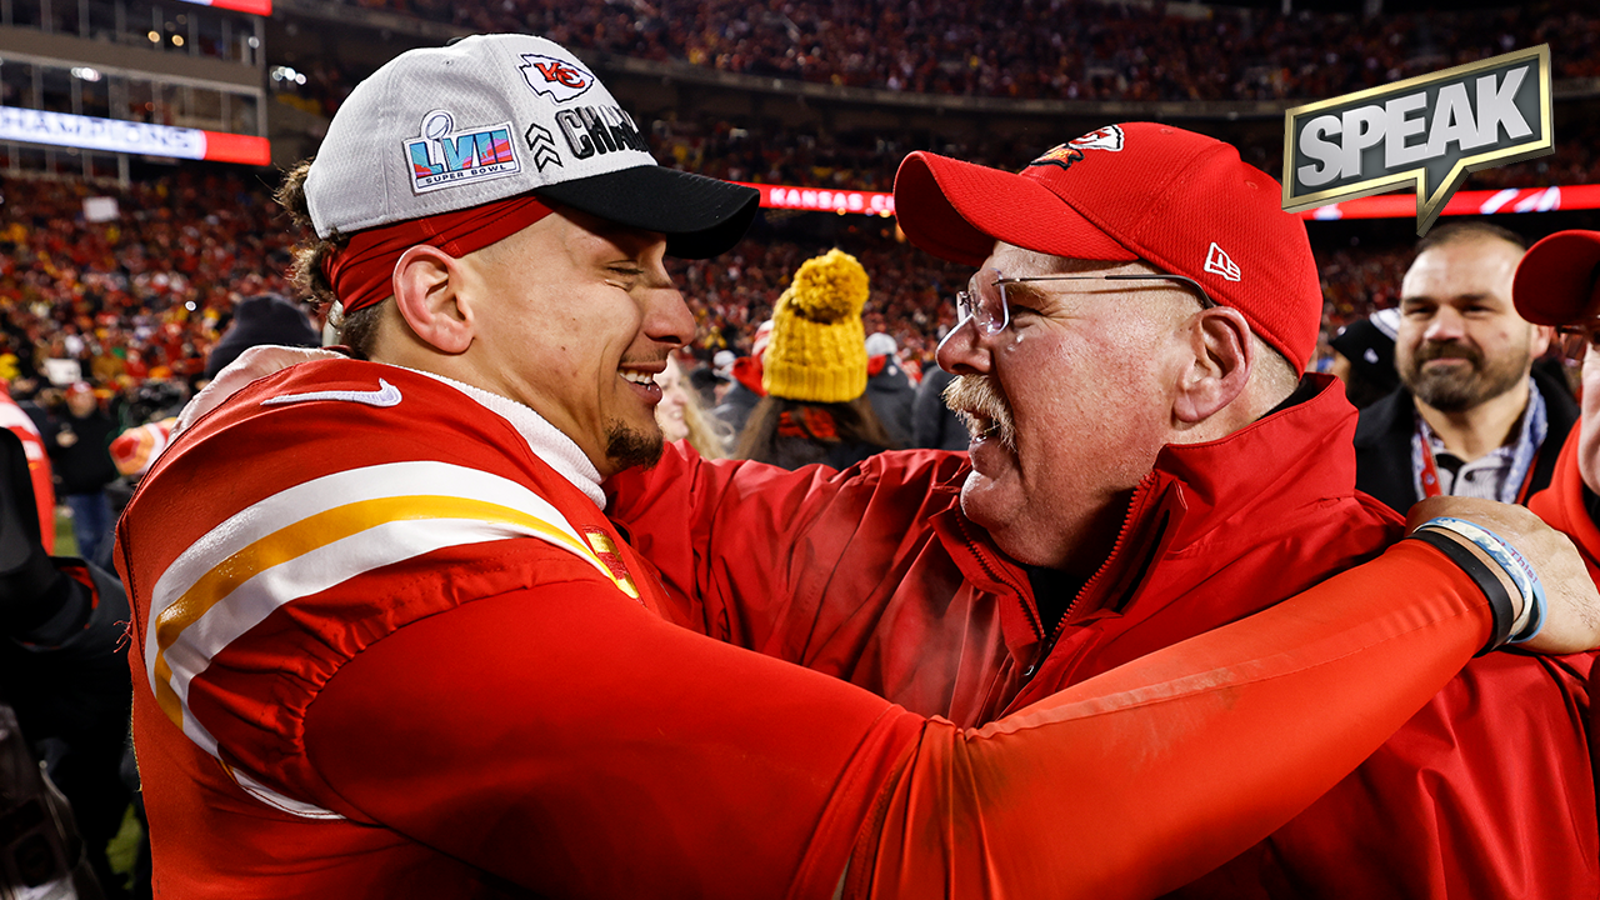 Who deserves the most credit for Chiefs' SBLVII win?